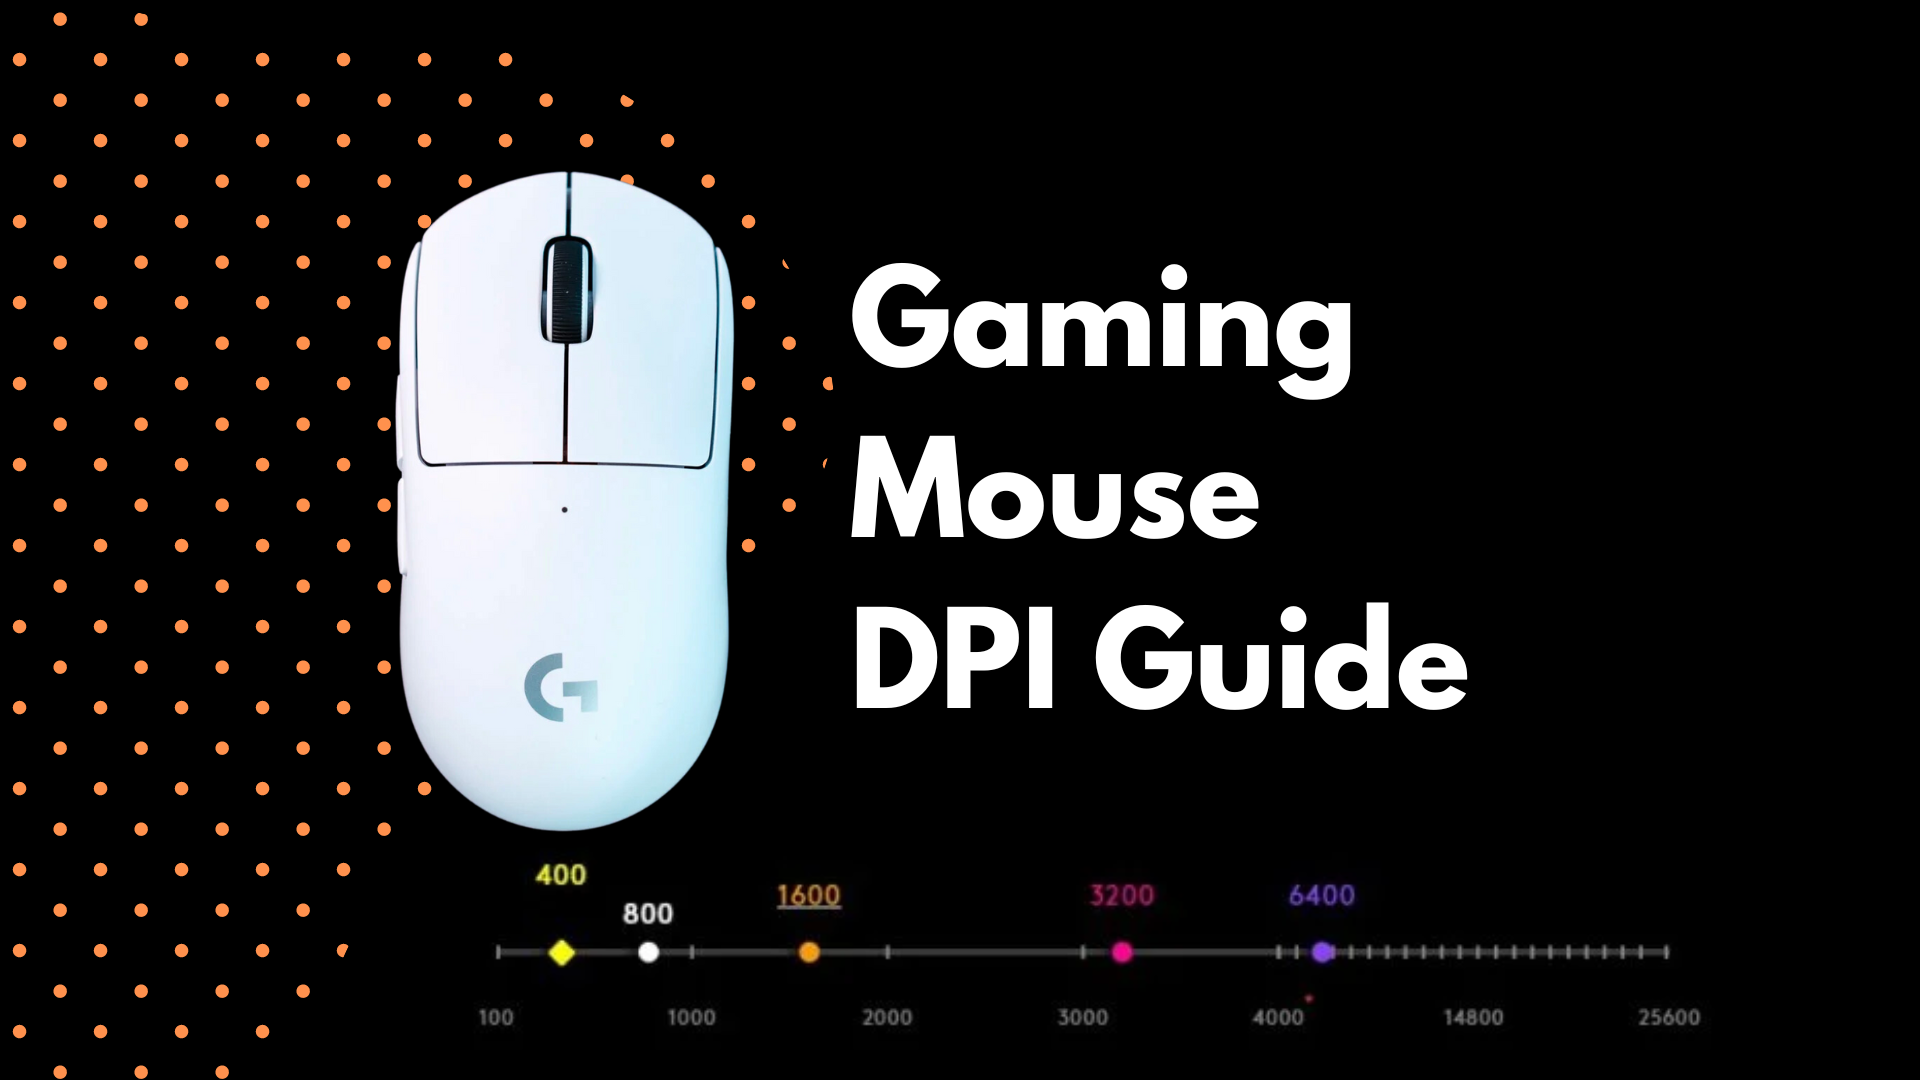 Gaming mouse DPI guide